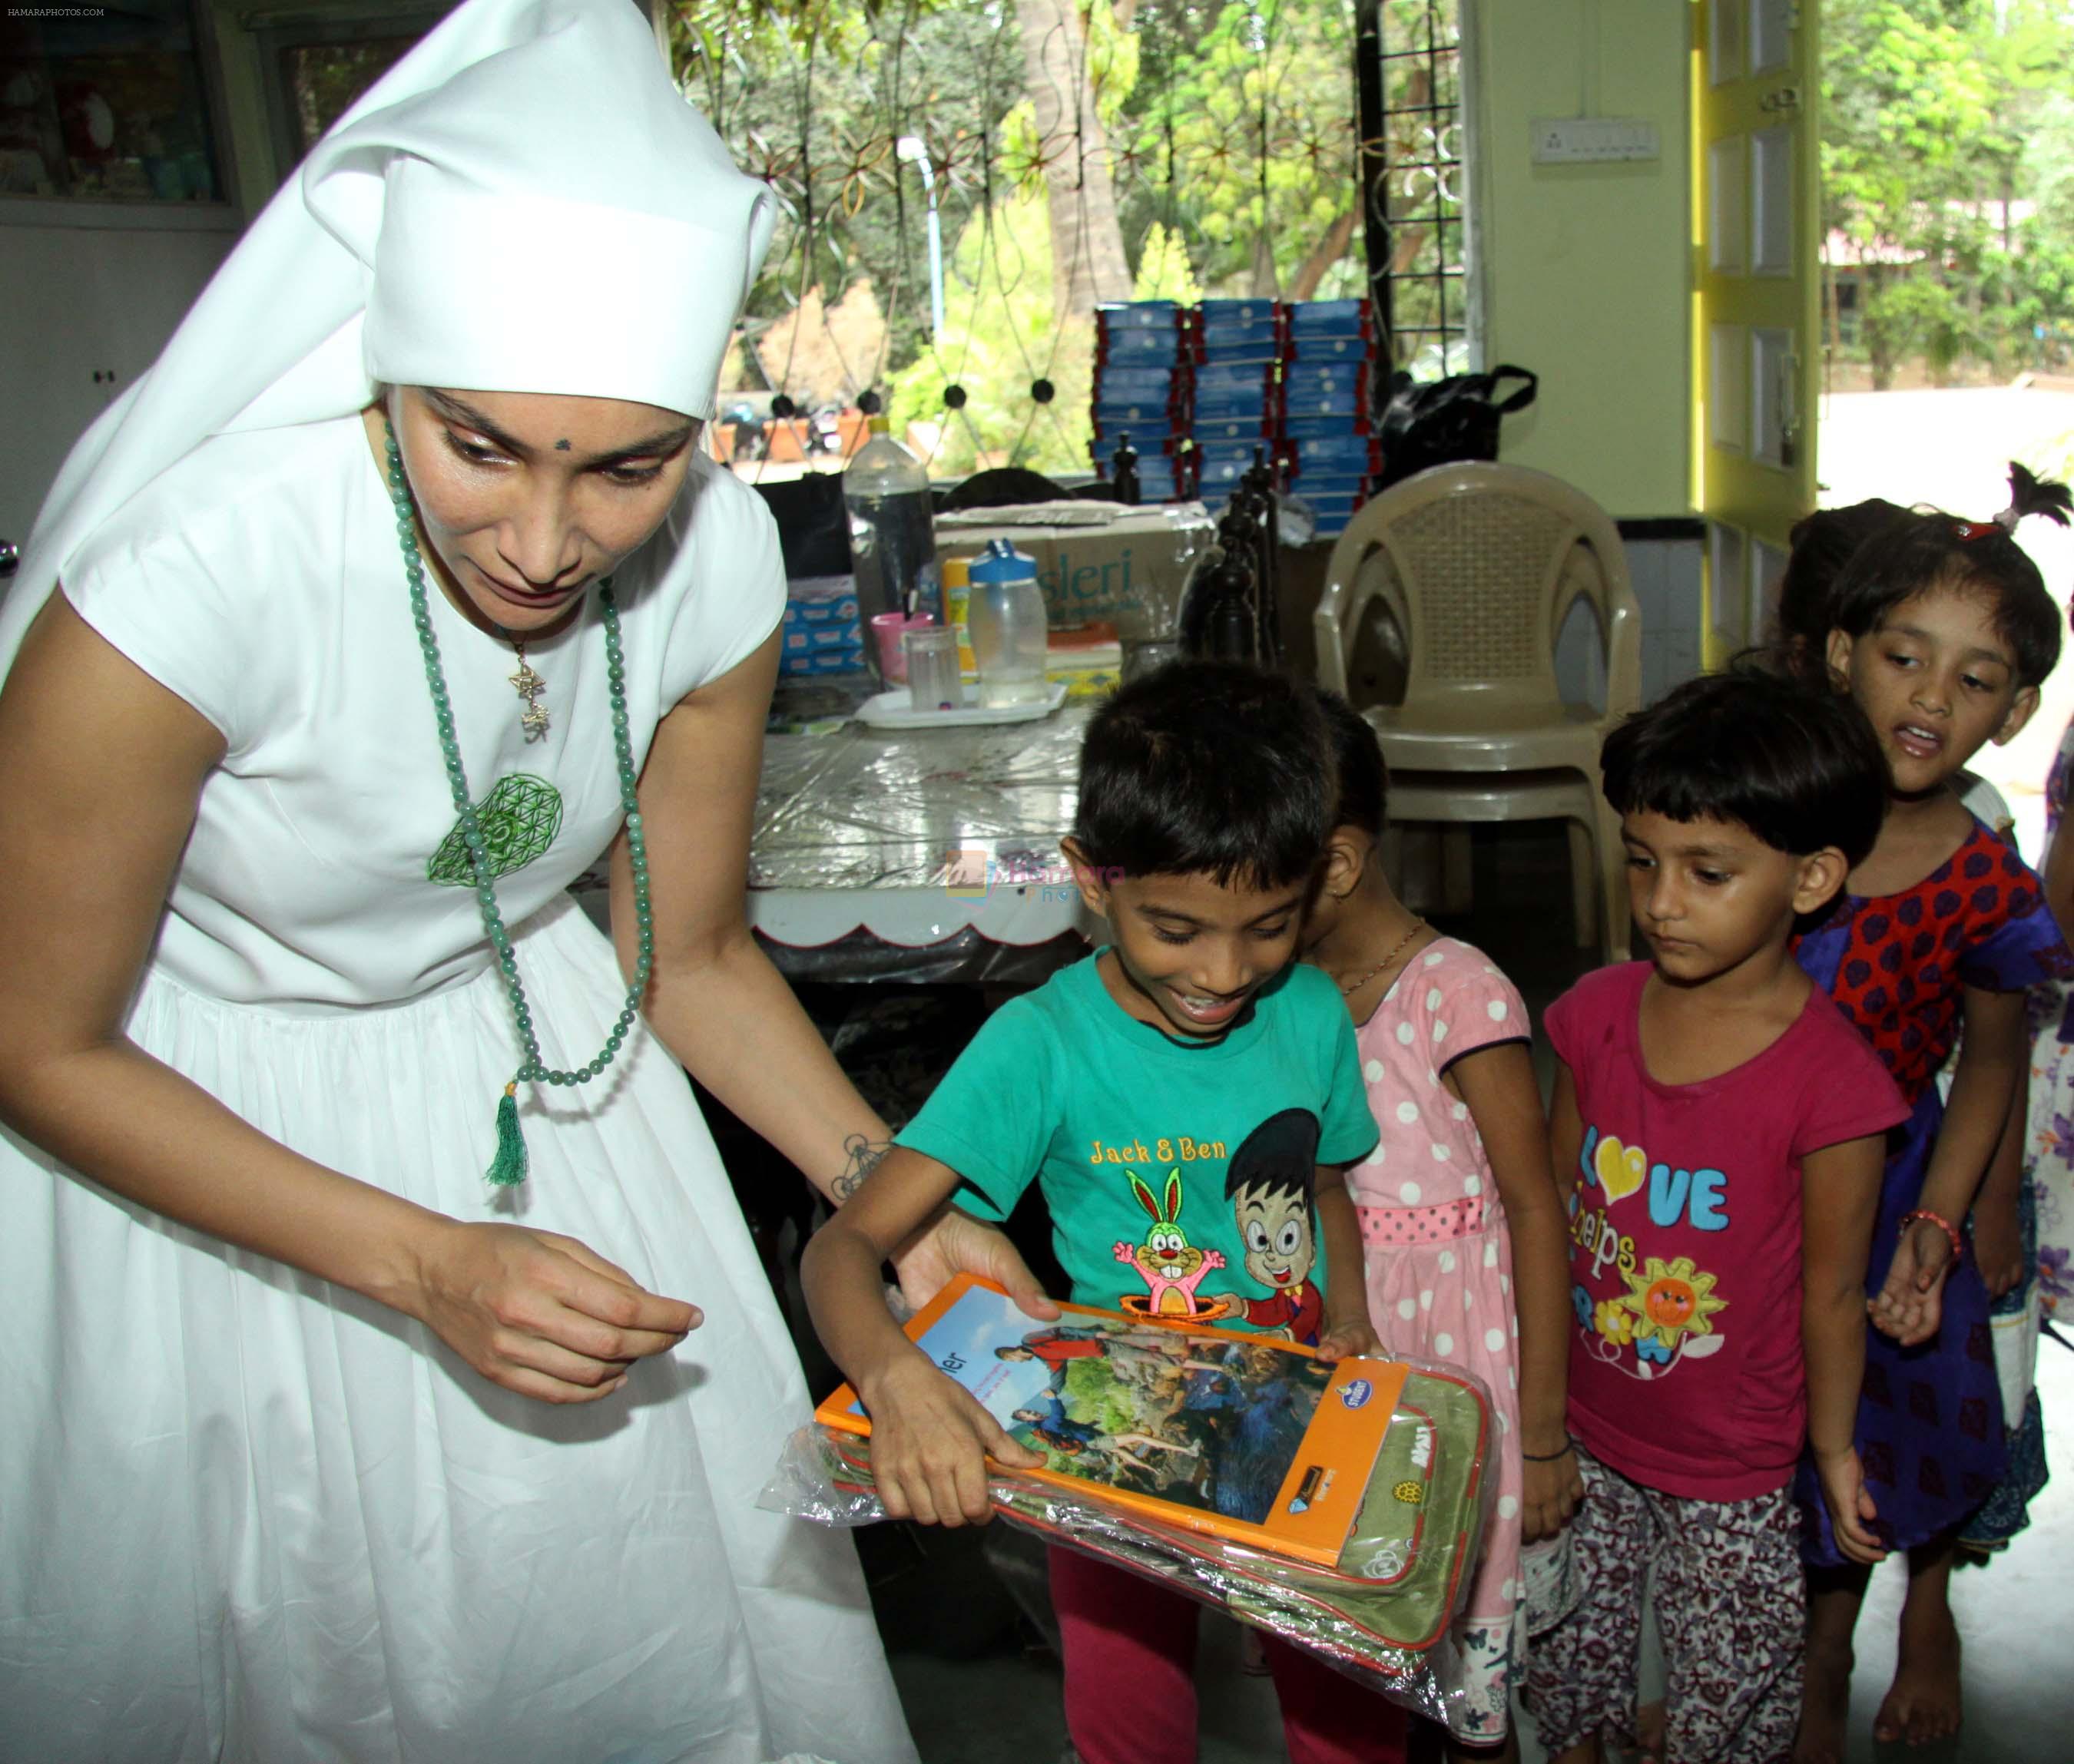 Gaia Mother Sofia distributed note books,bags to 140 girls of Bal Bhawan NGO at Andheri on 4th July 2016